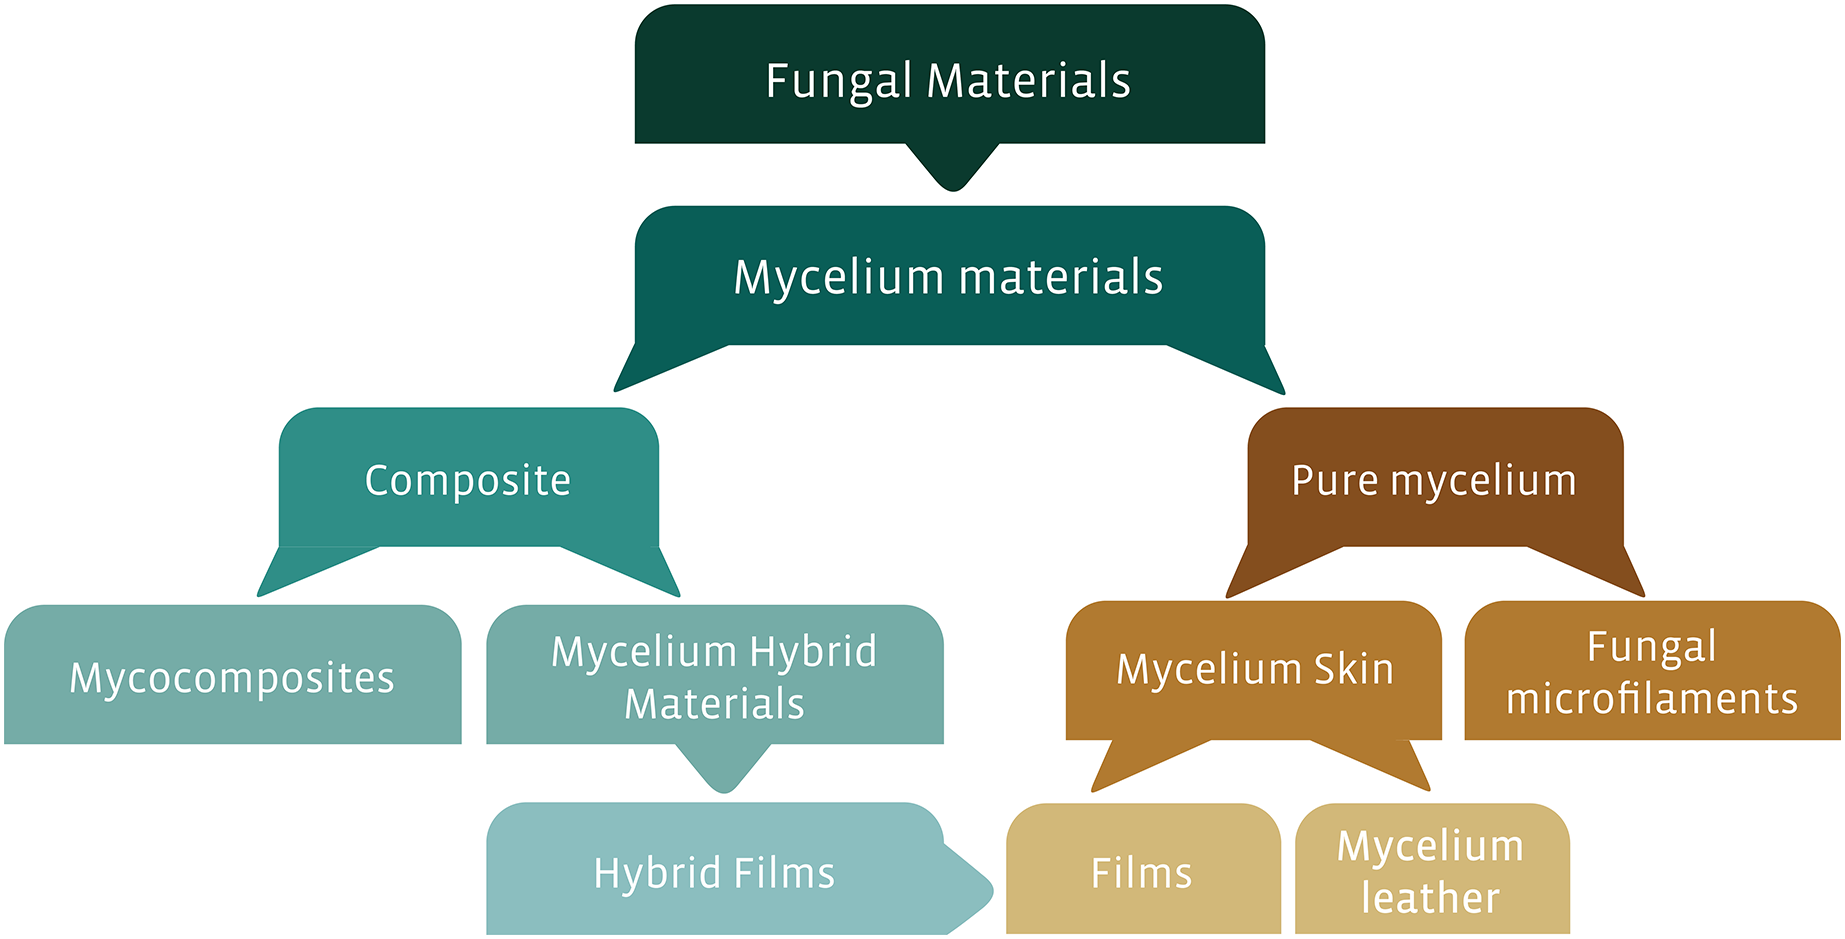 Living Fungal Electronic Devices Made of Mycelium or Composites